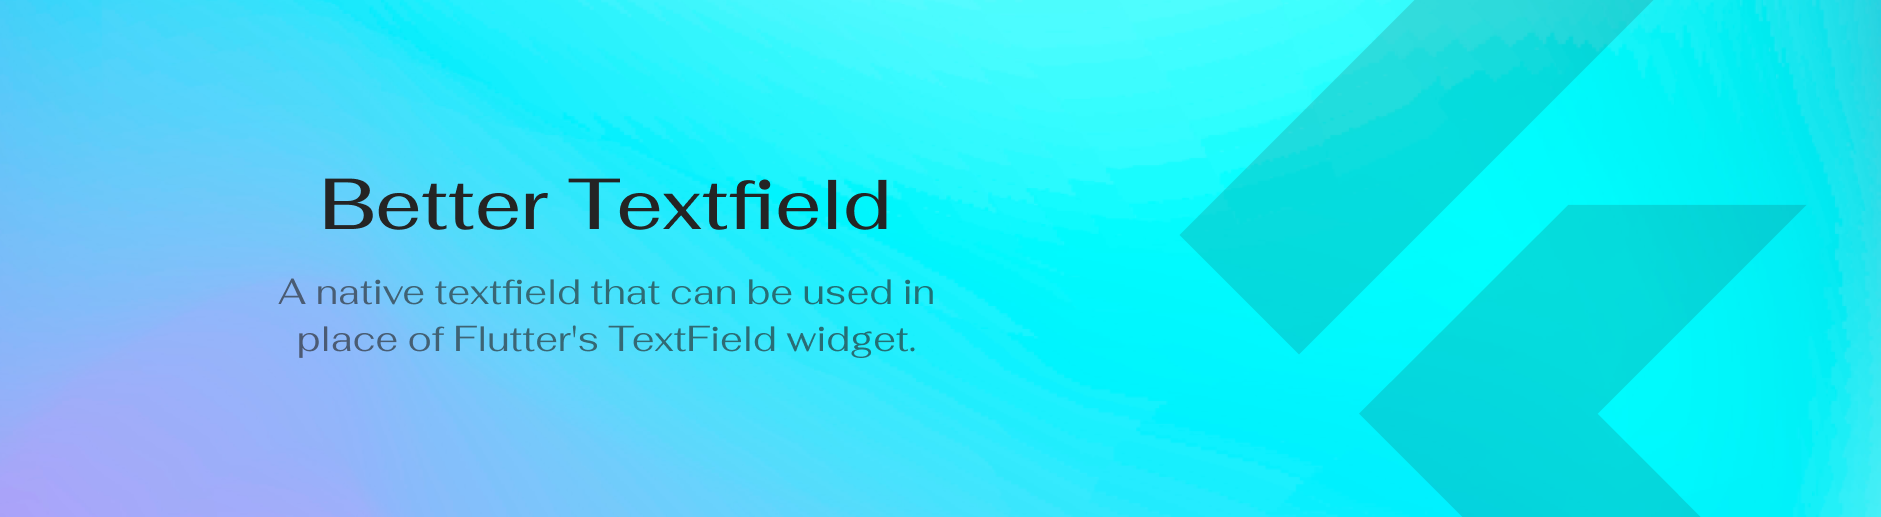 Better Textfield -A native textfield that can be used in place of Flutter's TextField widget.